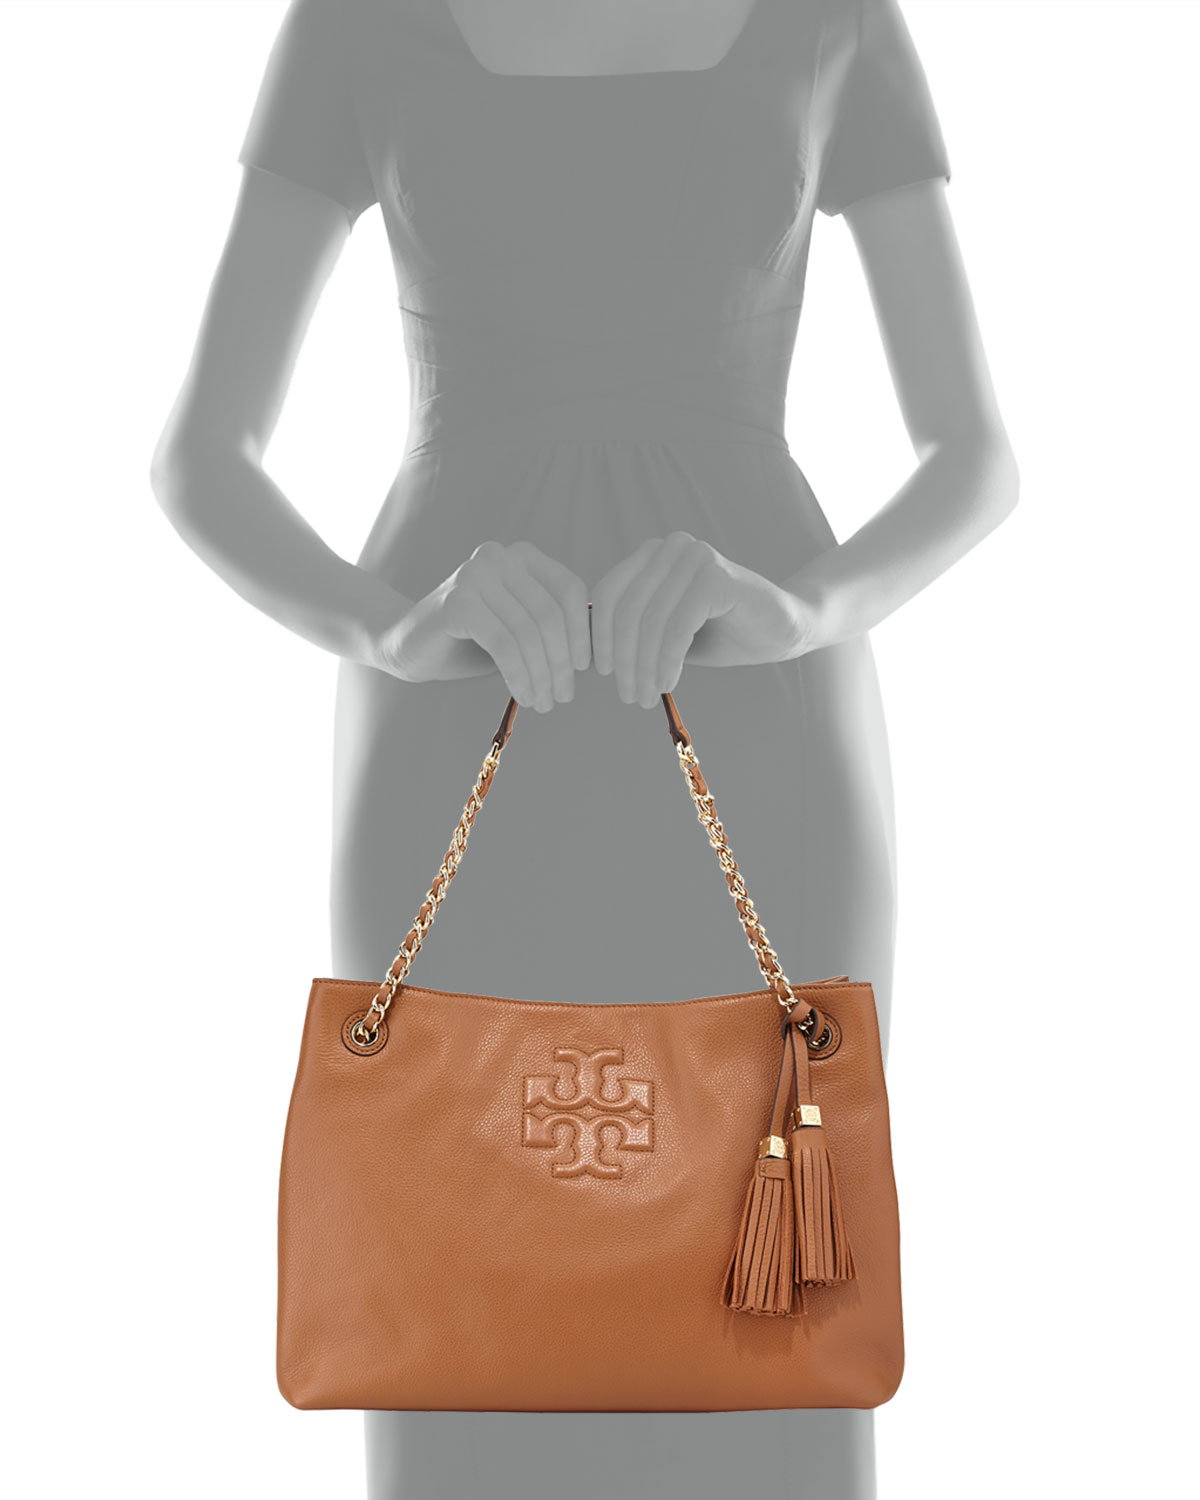 Tory burch Thea Large Chain Tote Bag in Brown (BARK) | Lyst